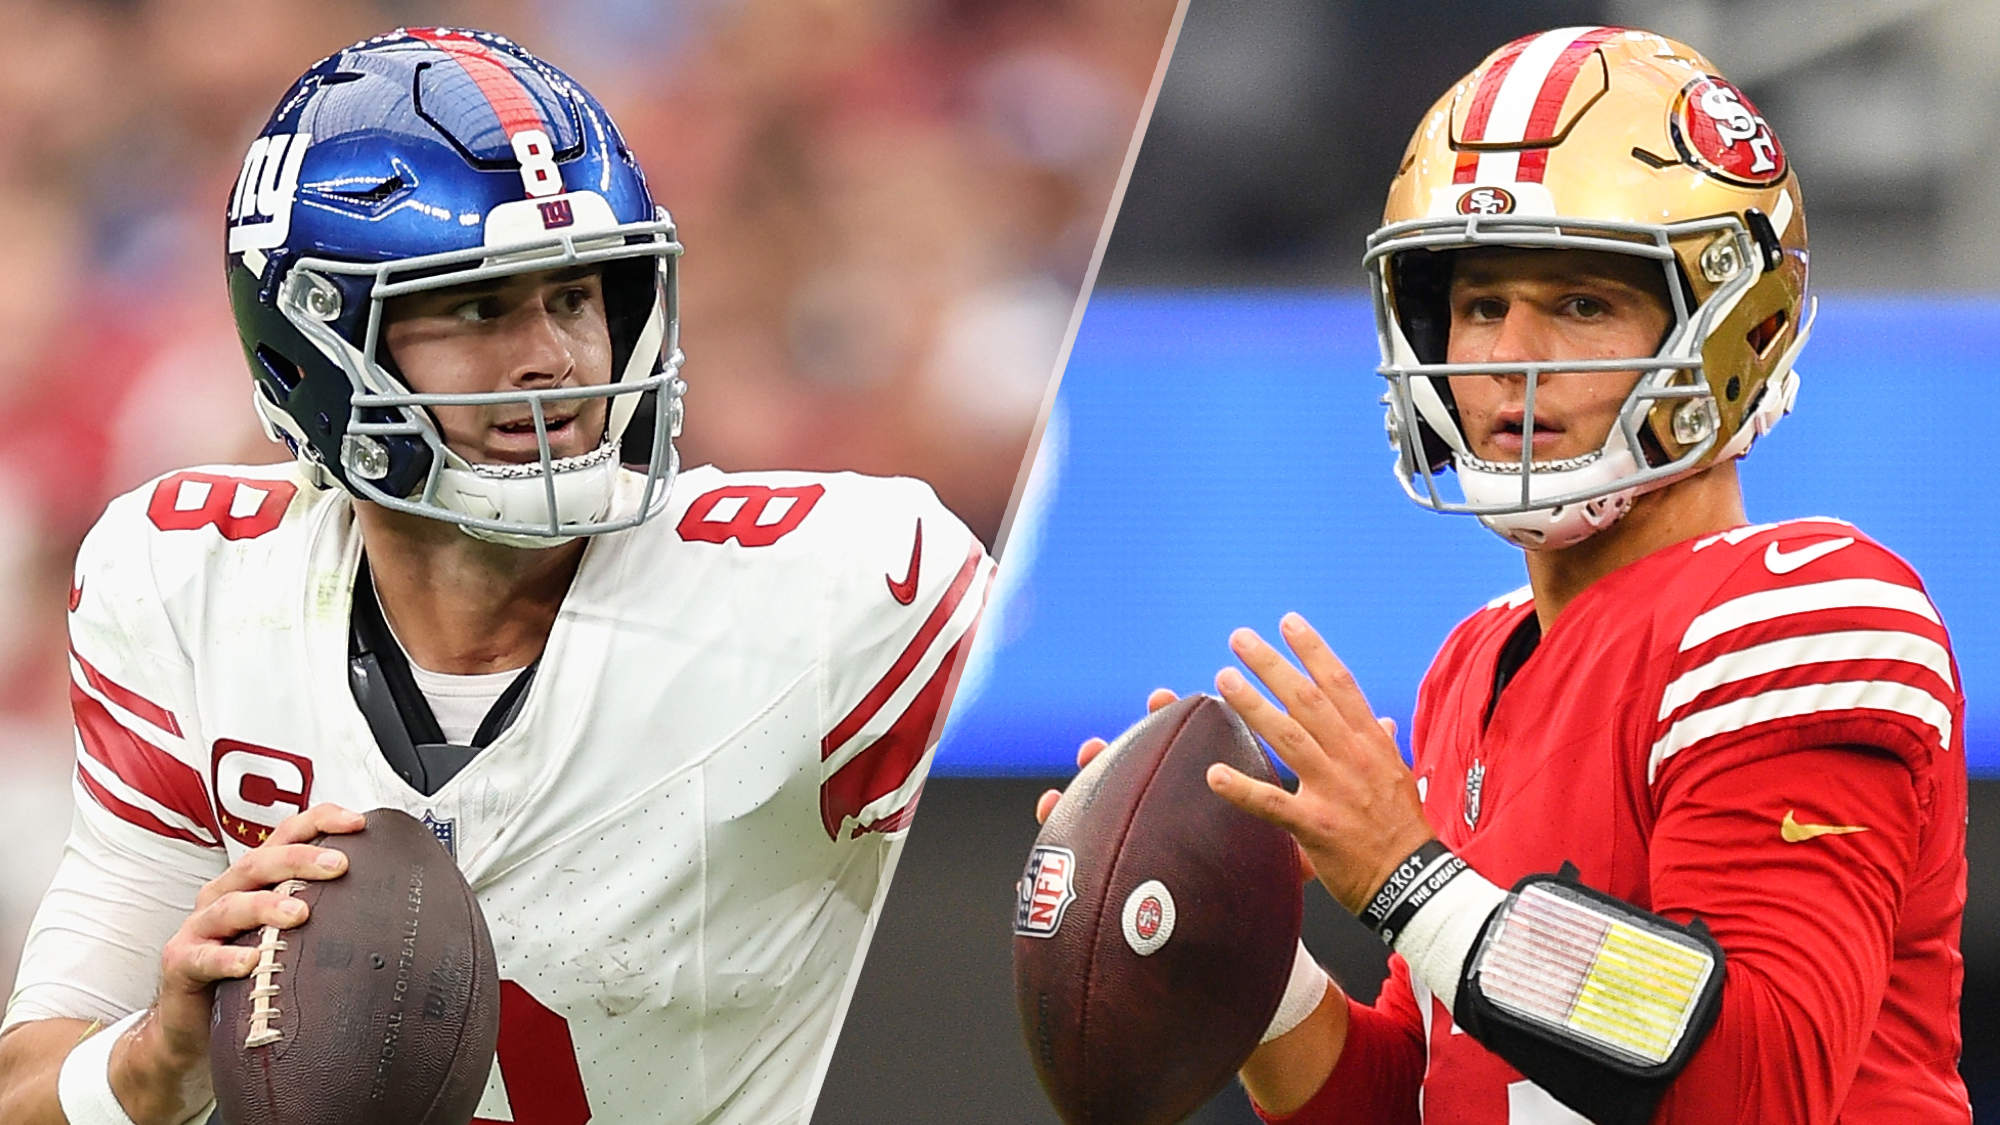 Giants vs 49ers live stream: How to watch Thursday Night Football